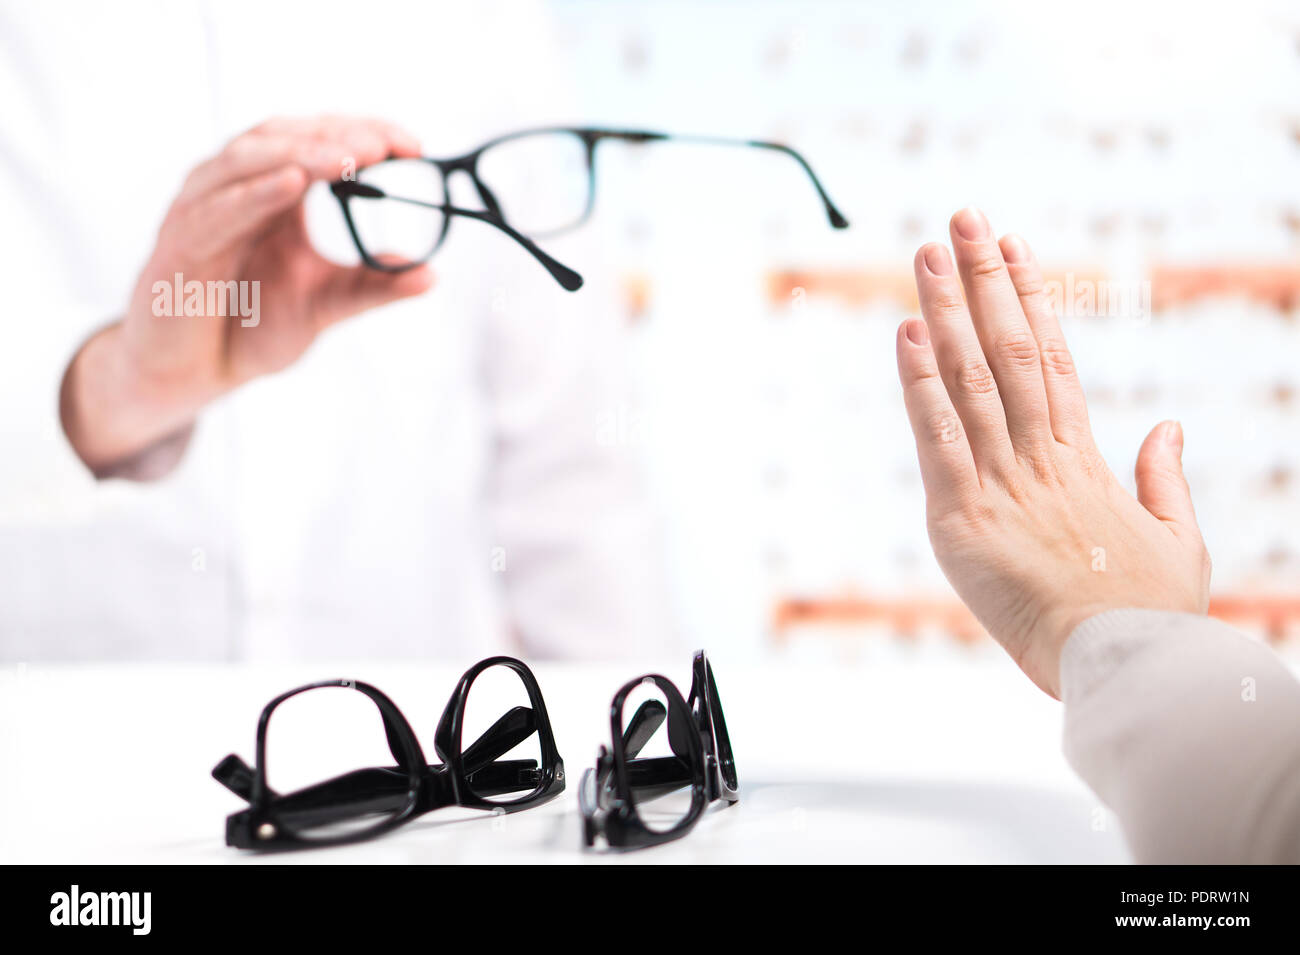 Problem at optician. Unhappy customer refuse to try or don't like new glasses. Bad service in spectacles store. Disappointed and angry patient. Stock Photo